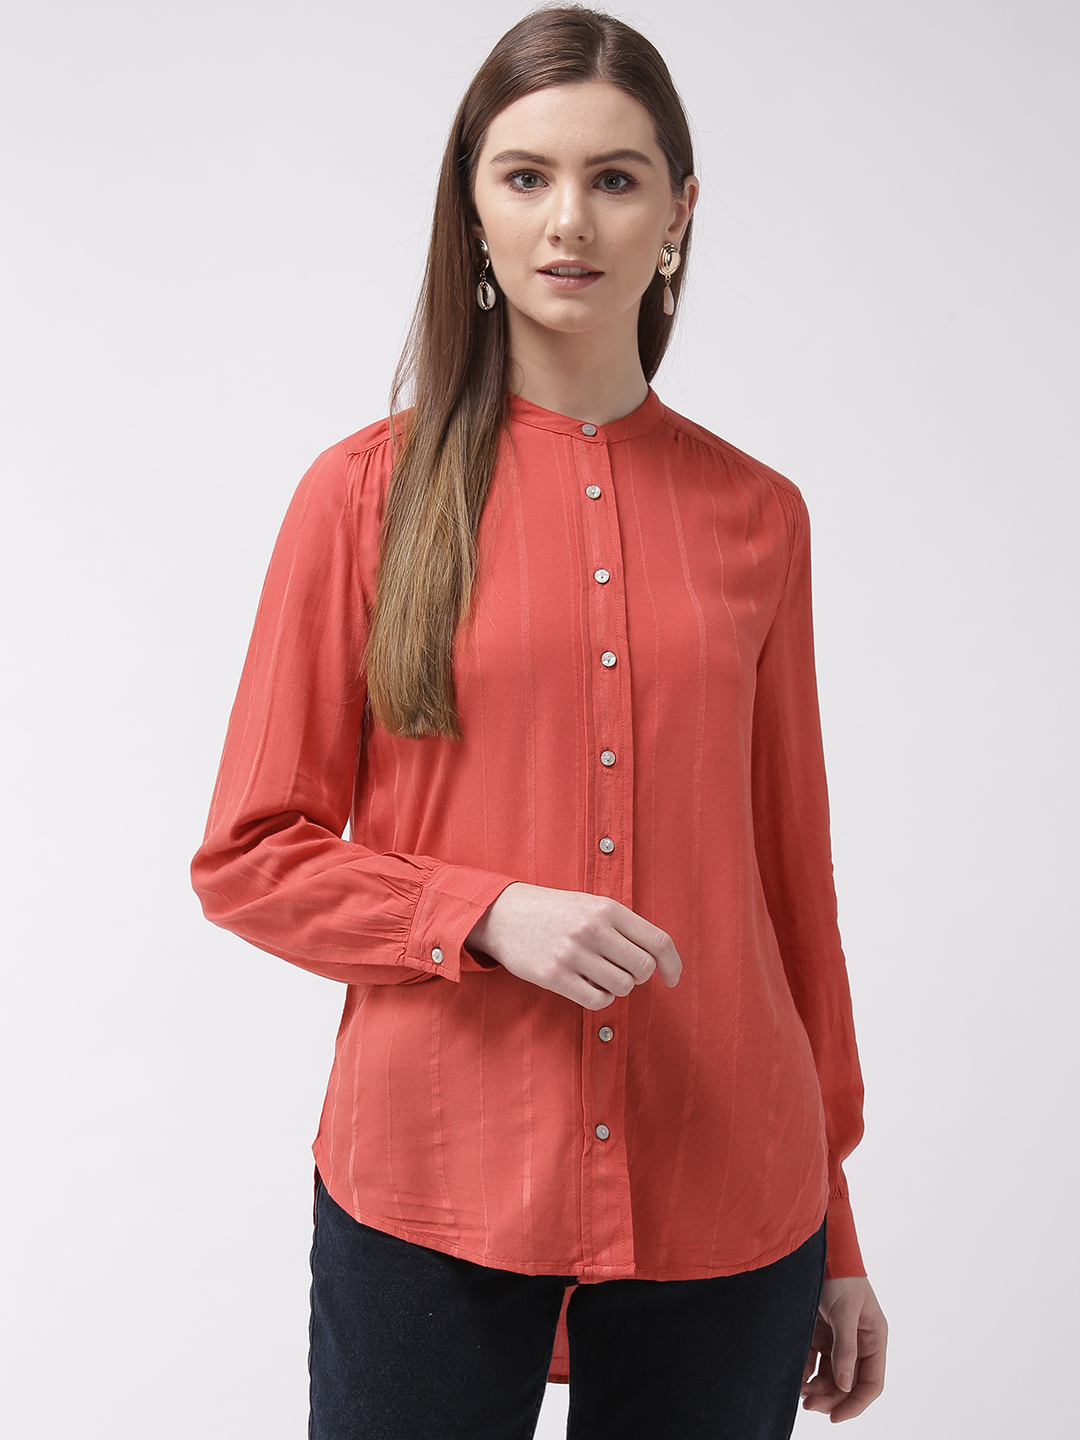 Marks & Spencer Women Coral Red Regular Fit Striped Casual Shirt Price in India